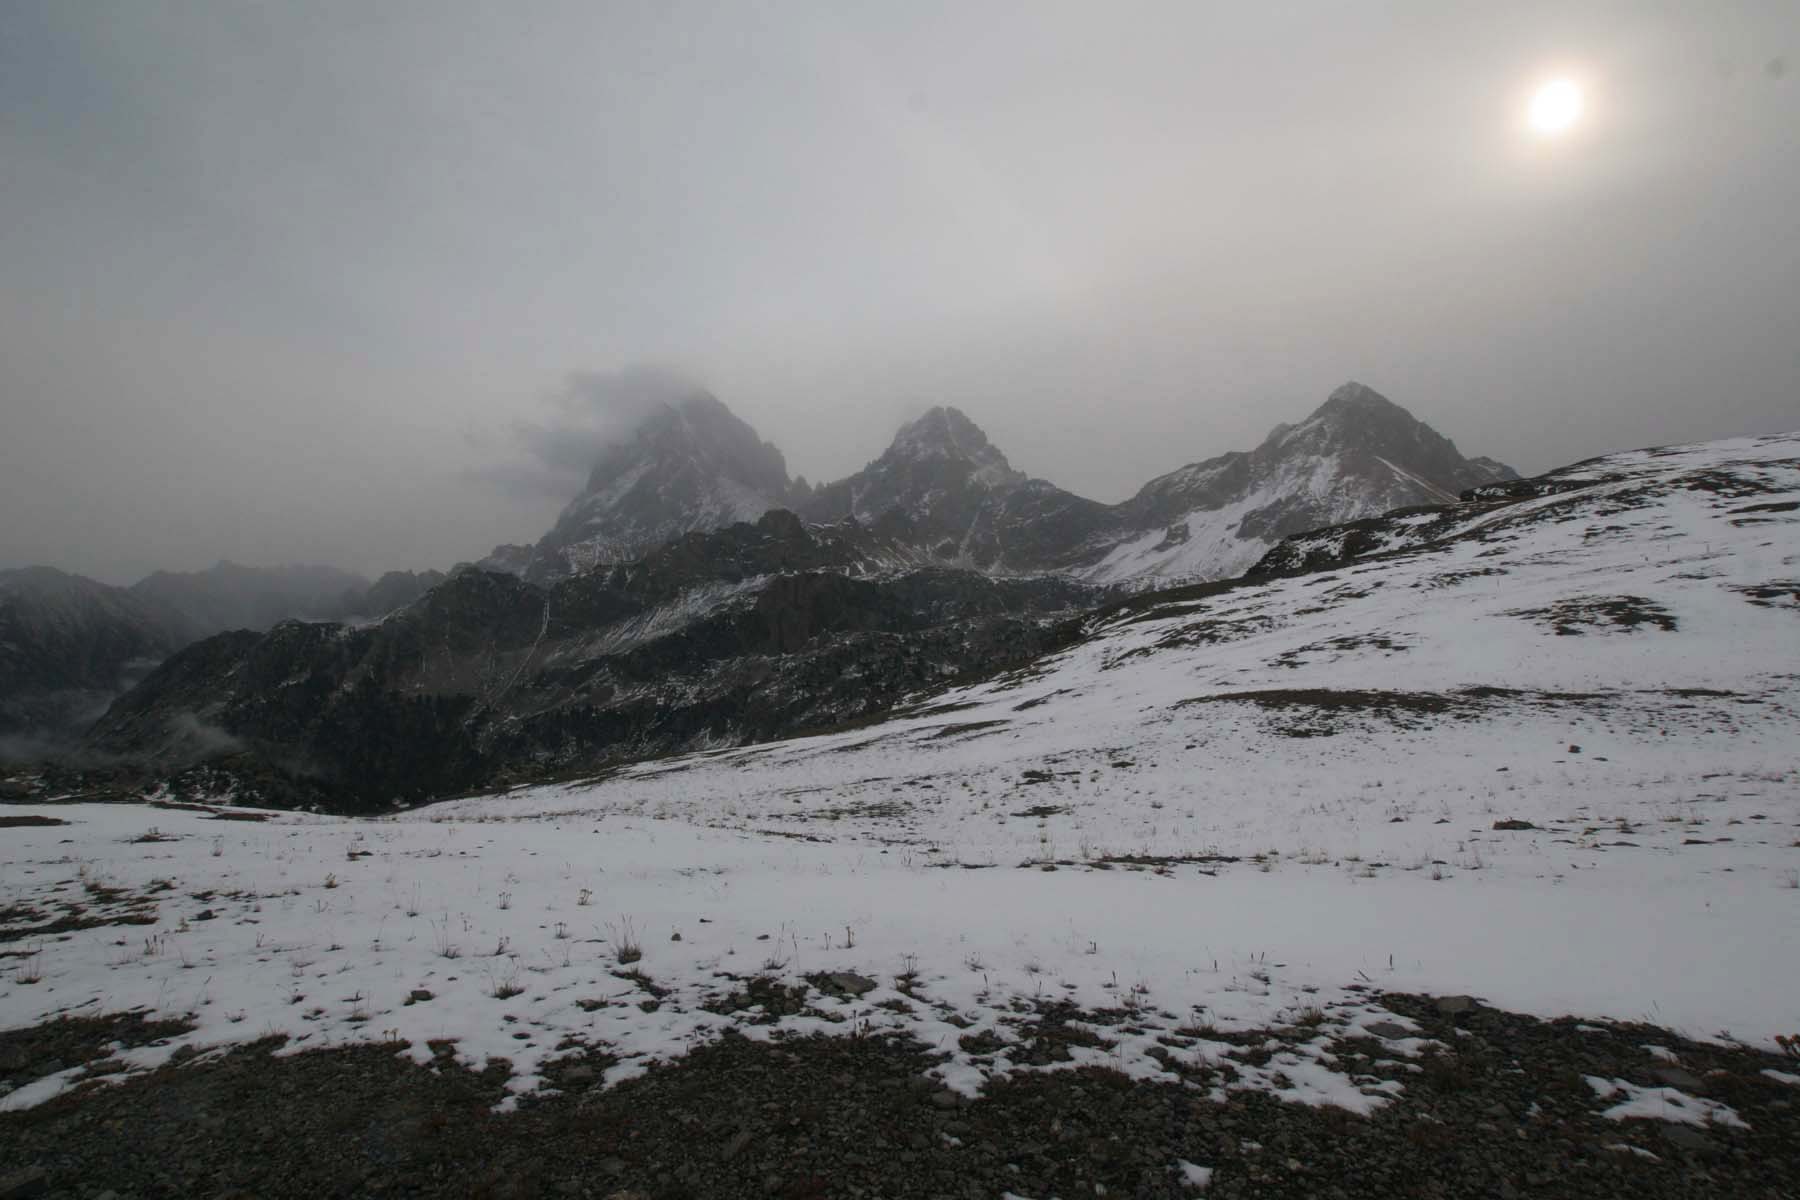 Grand, Middle, and South Teton